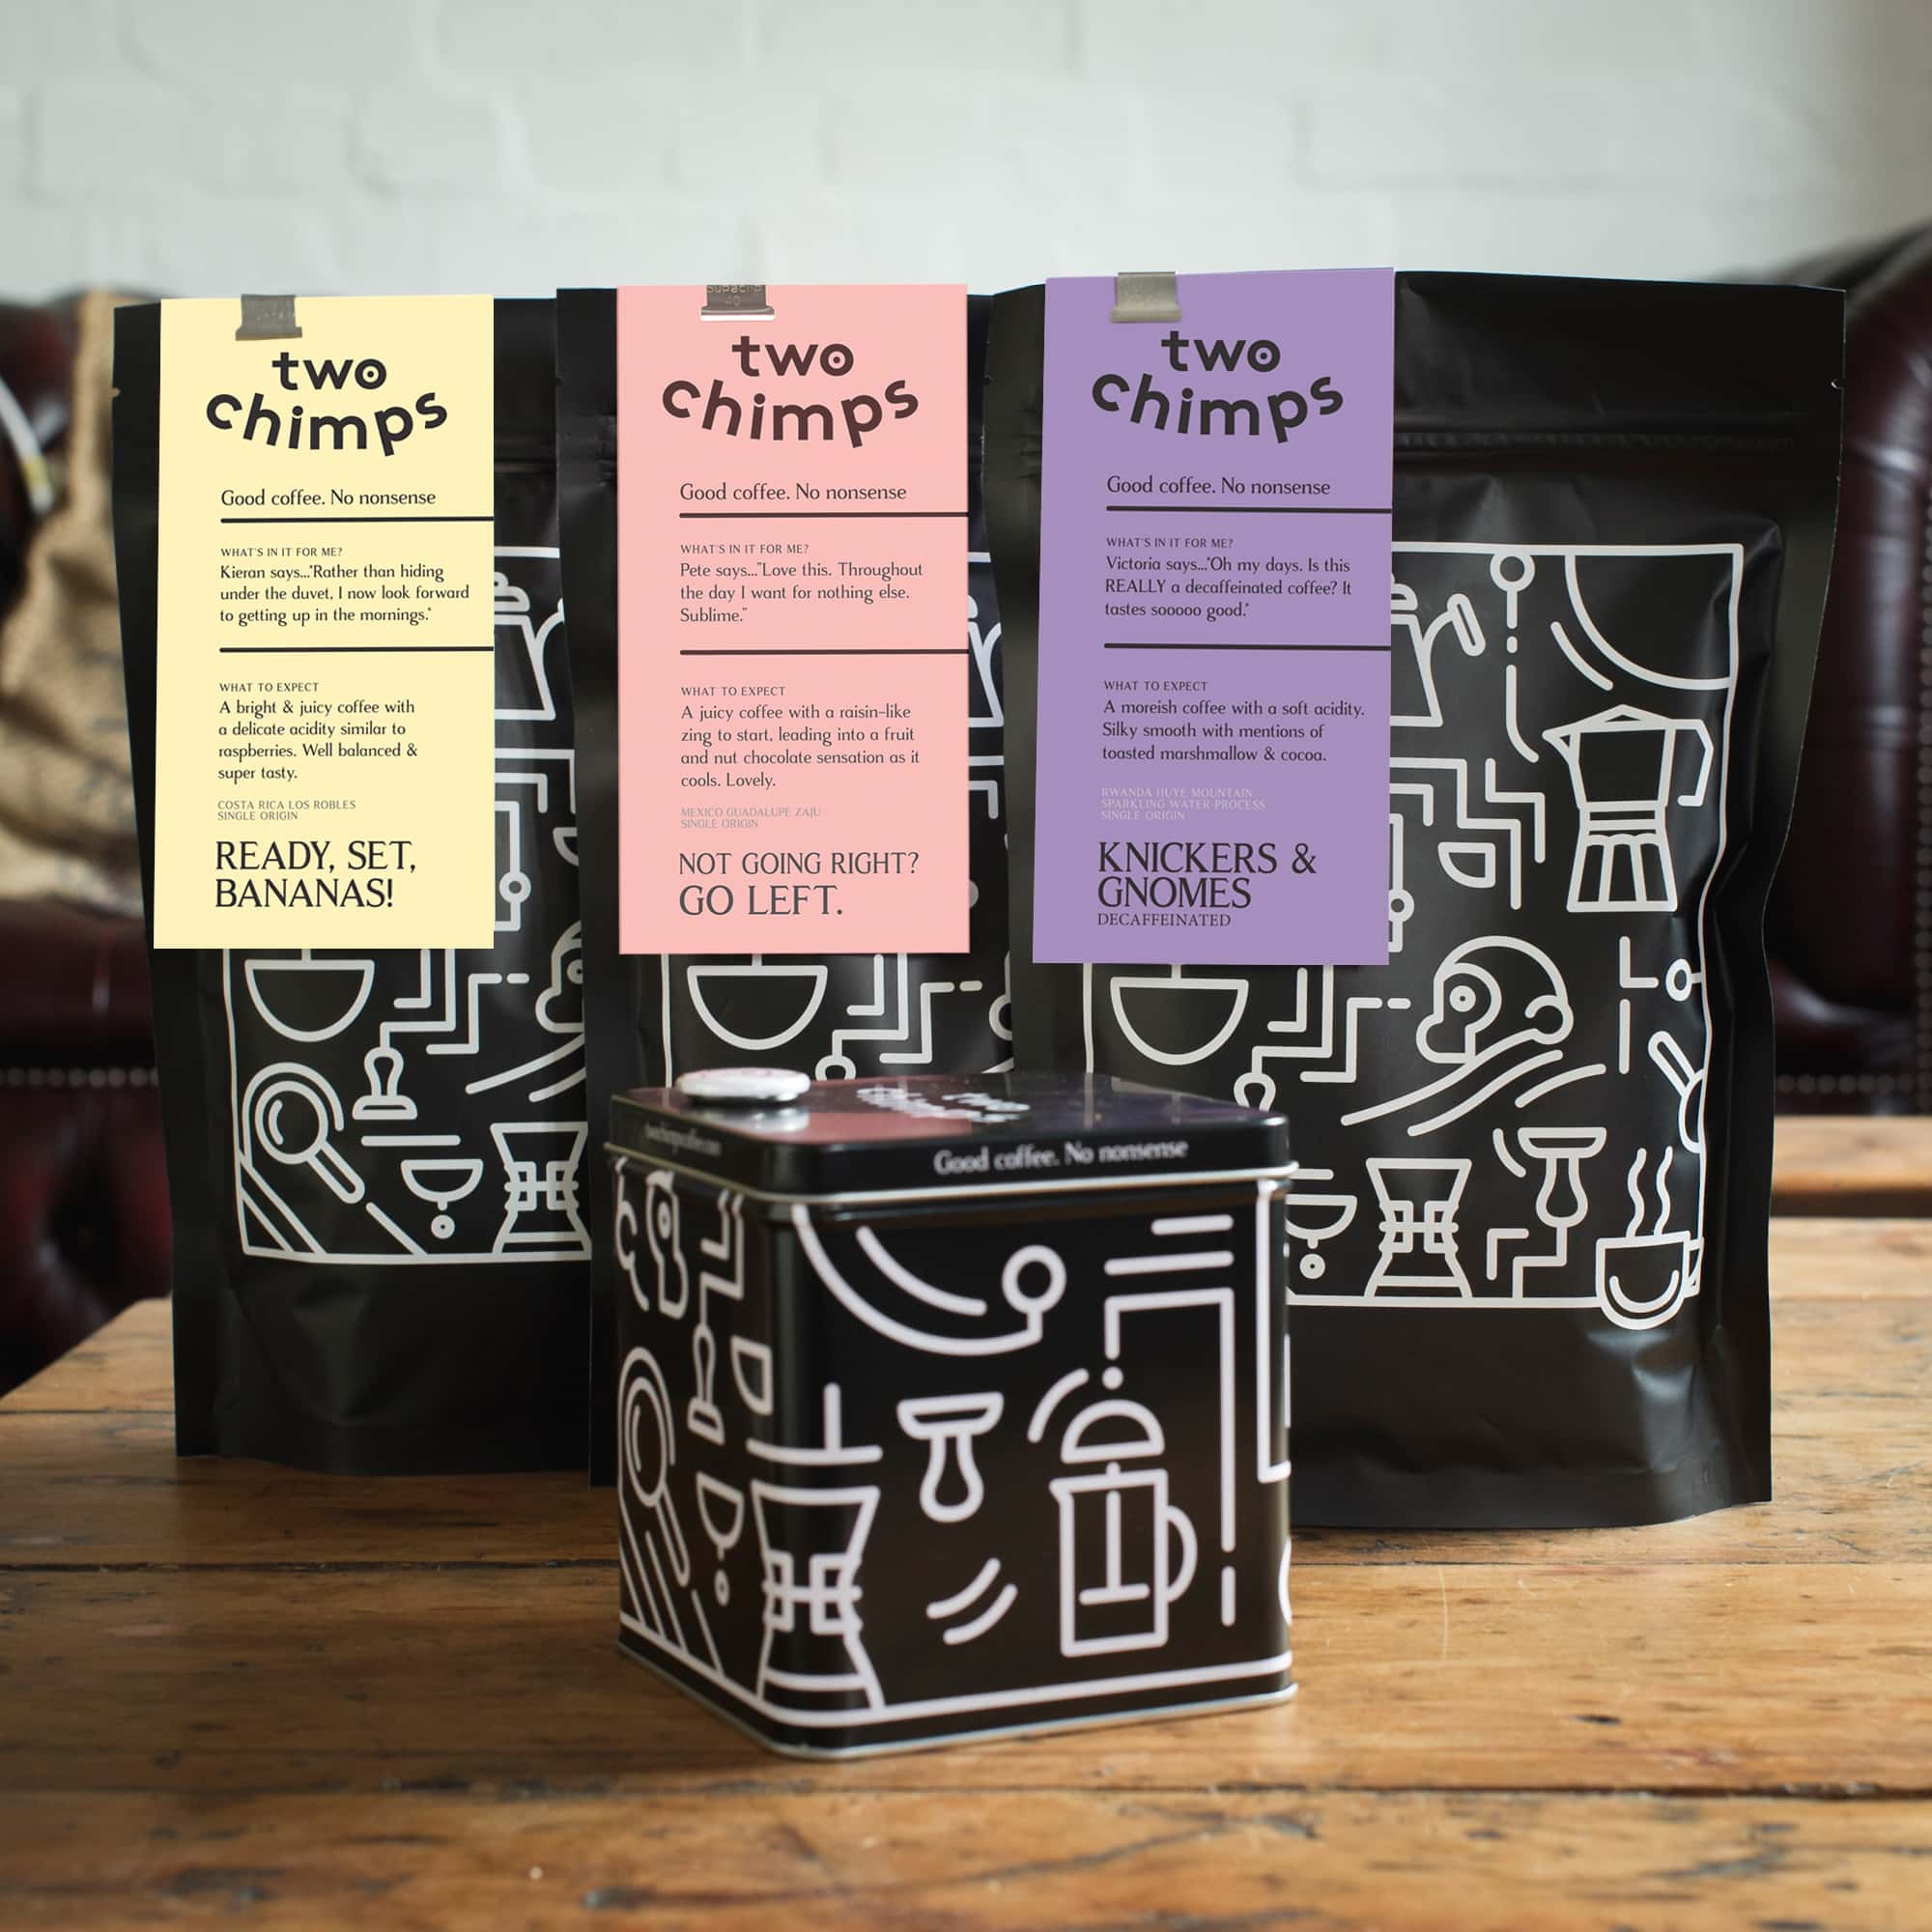 Three coffee names from Two Chimps